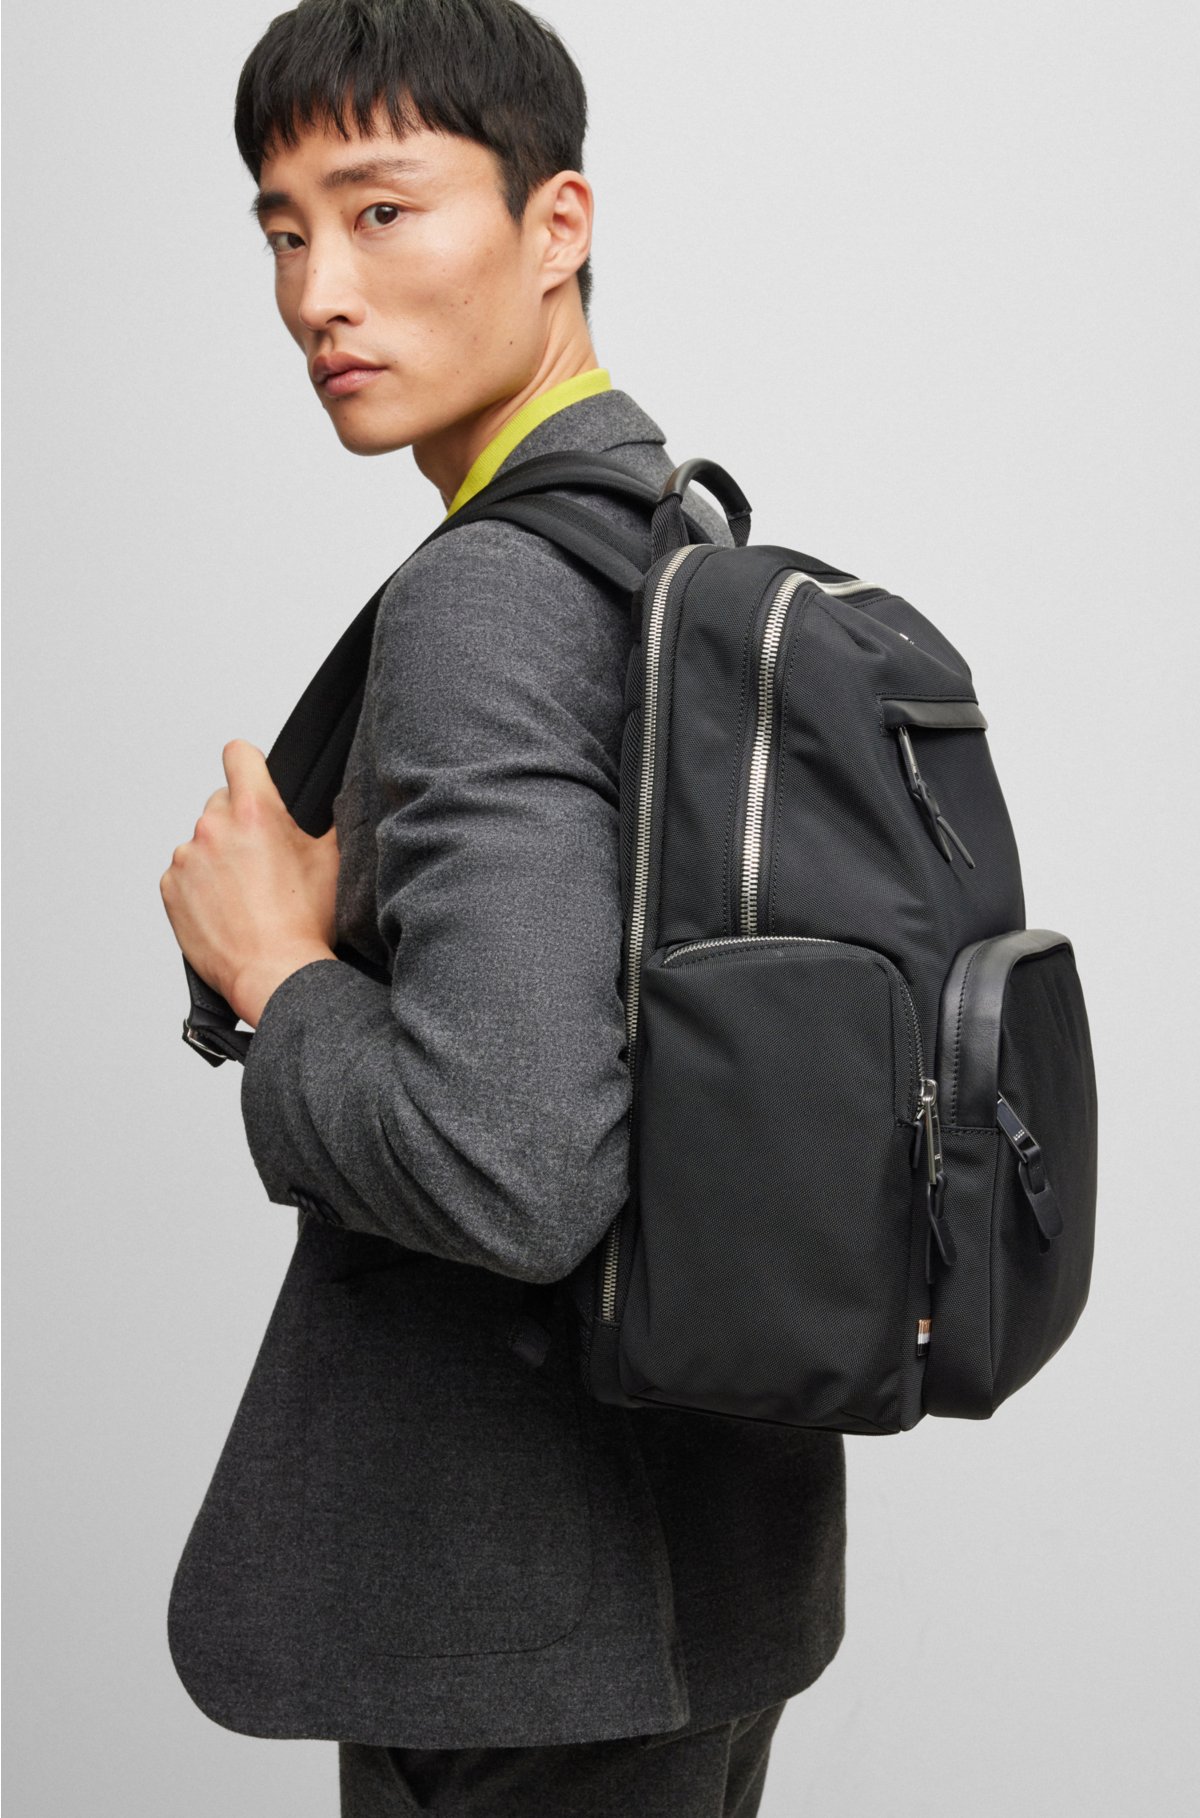 Structured-material backpack with logo and two-way zip, Black